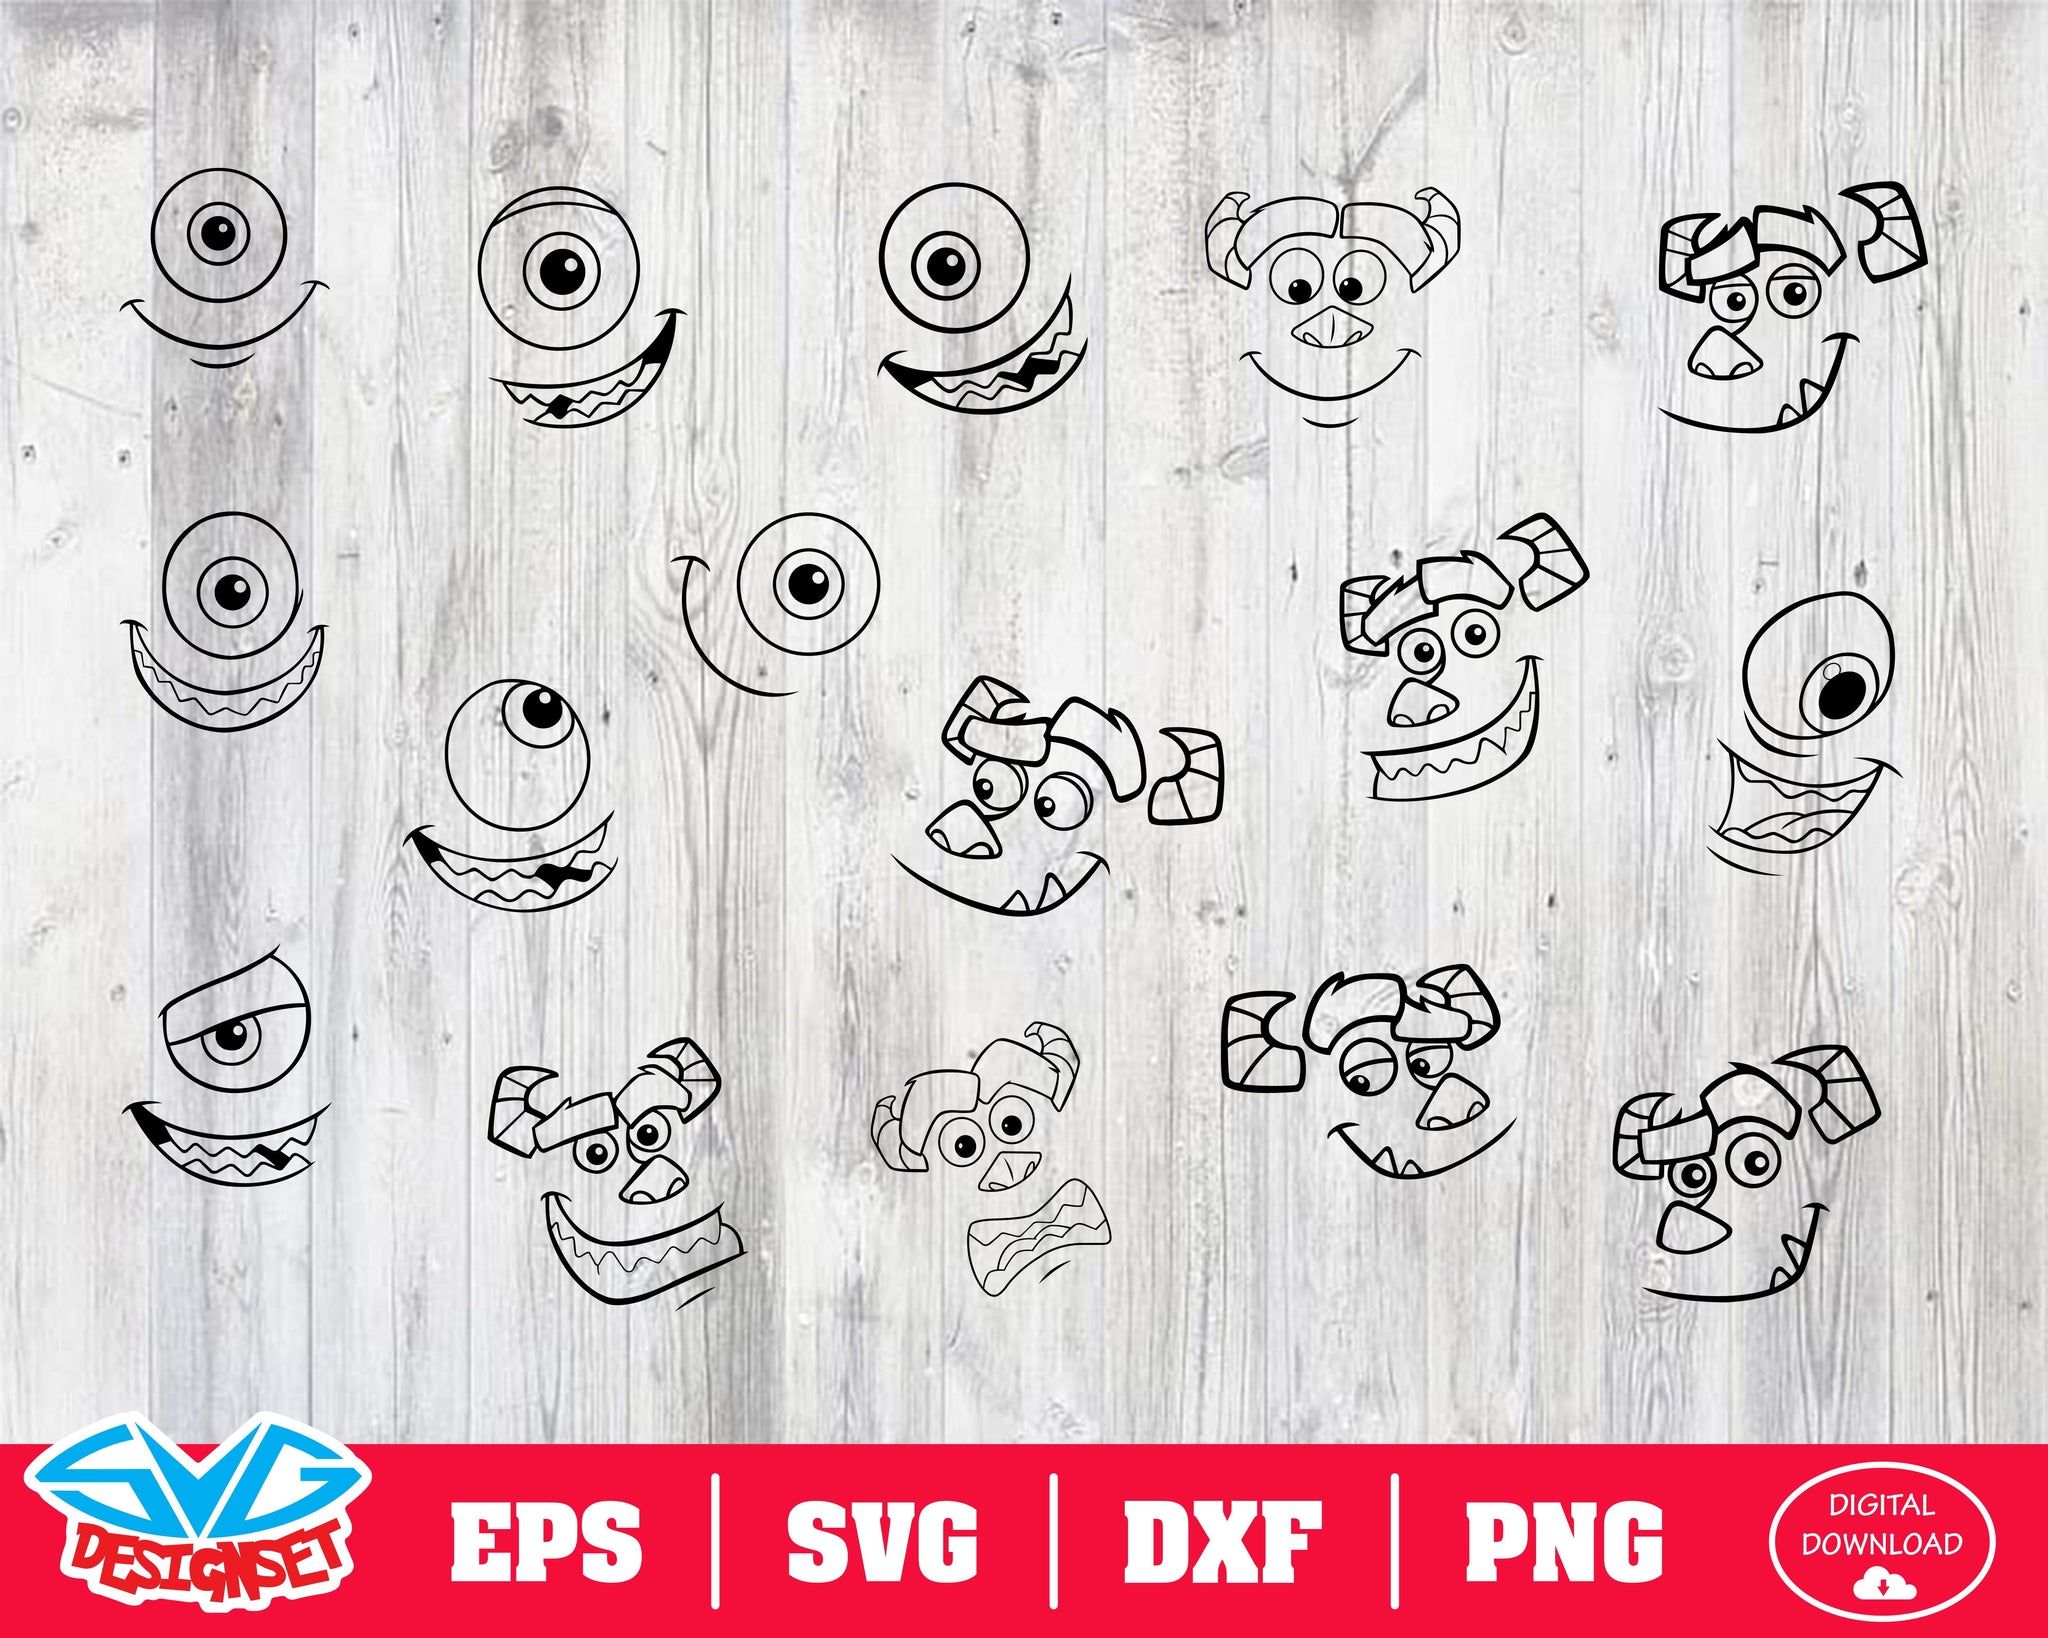 Monsters Inc Svg, Dxf, Eps, Png, Clipart, Silhouette and Cutfiles #4 - SVGDesignSets